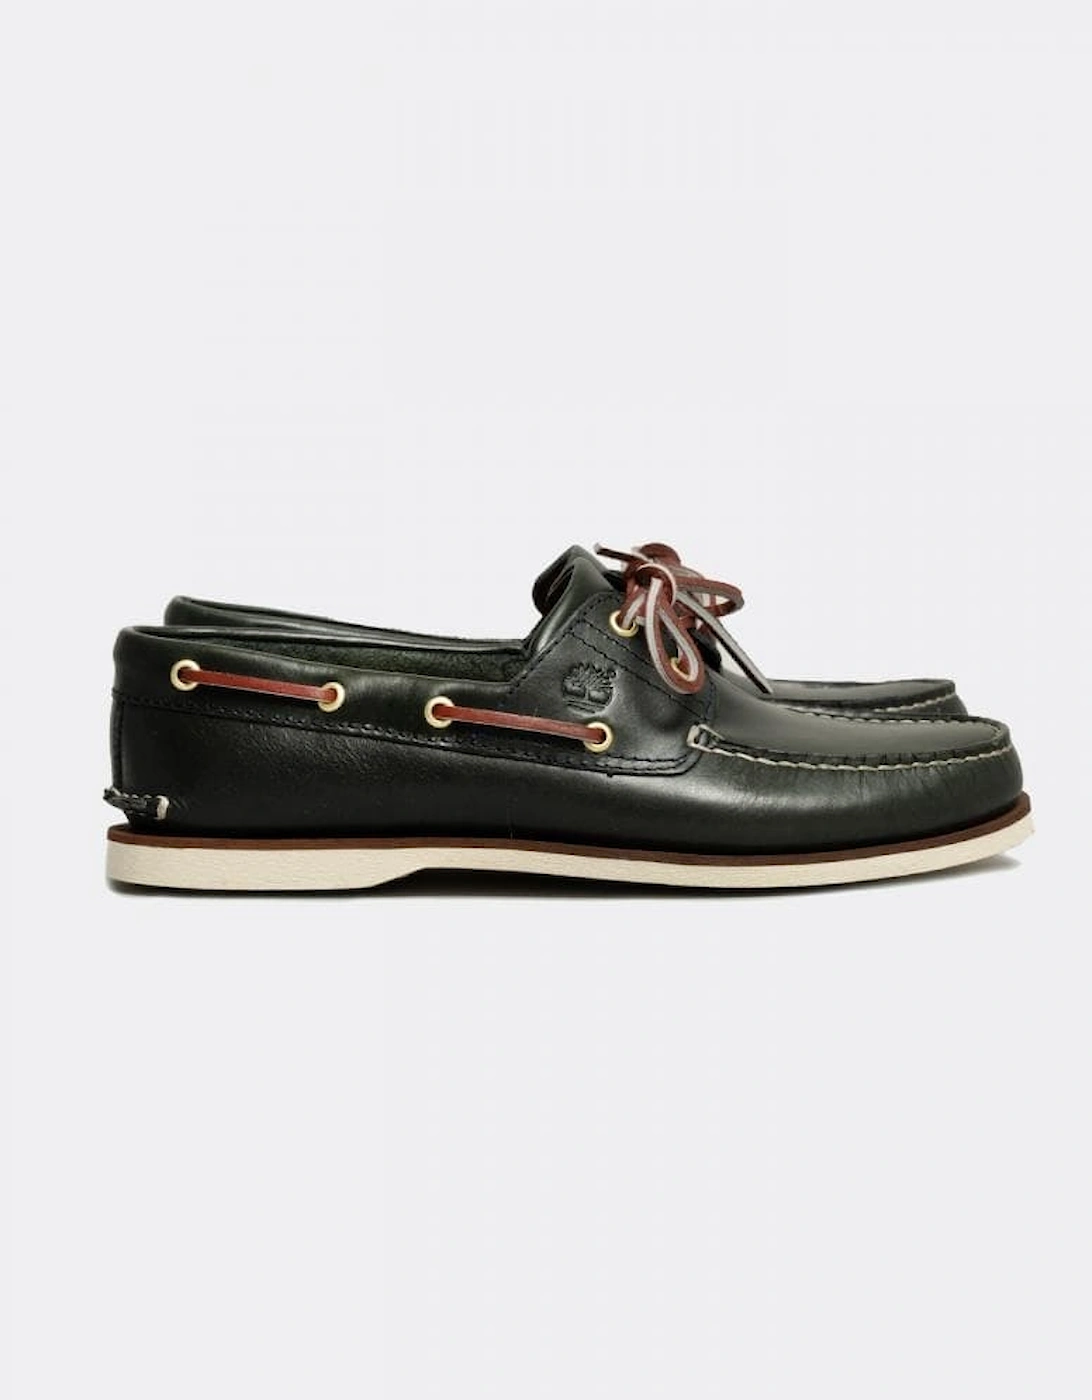 Earthkeepers Classic Mens Boat Shoe